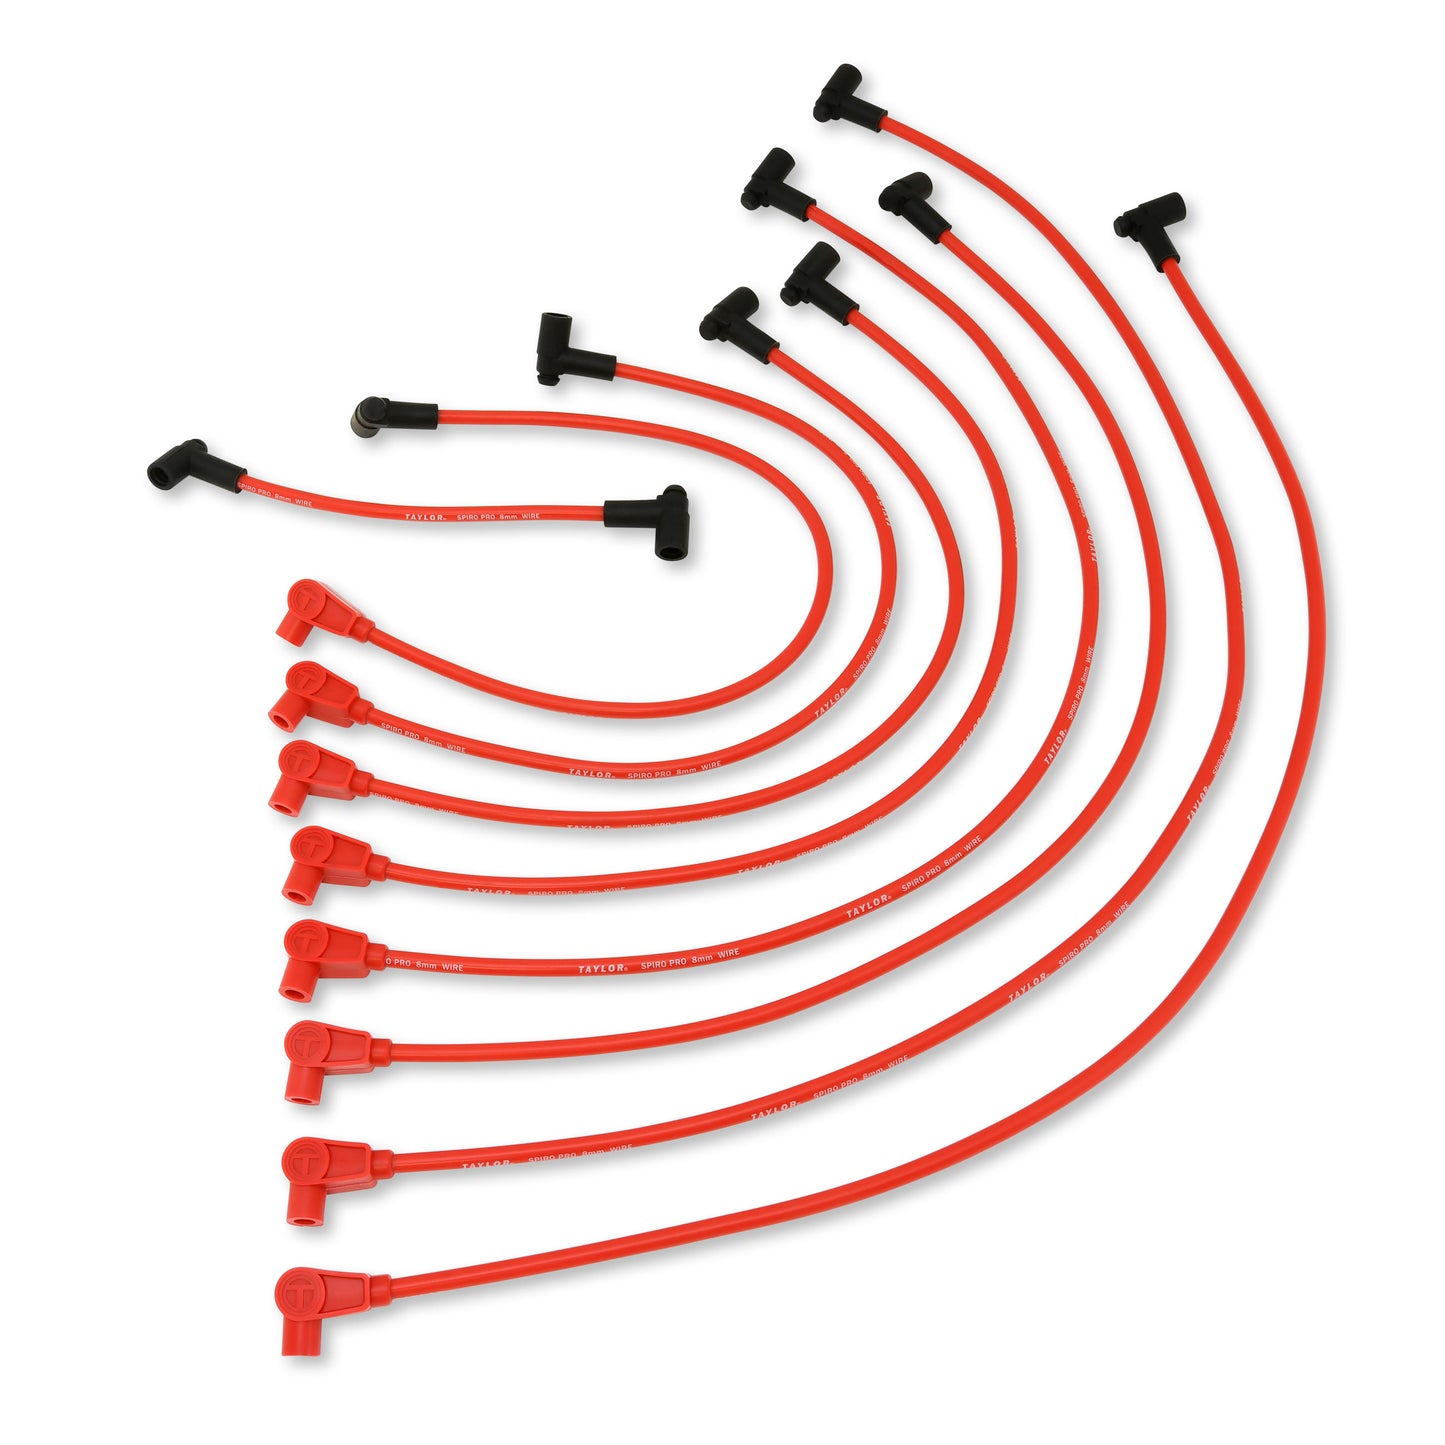 Taylor Cable 79227 10.4mm 409 Spiro Pro Race Fit Spark Plug Wires 90° Red